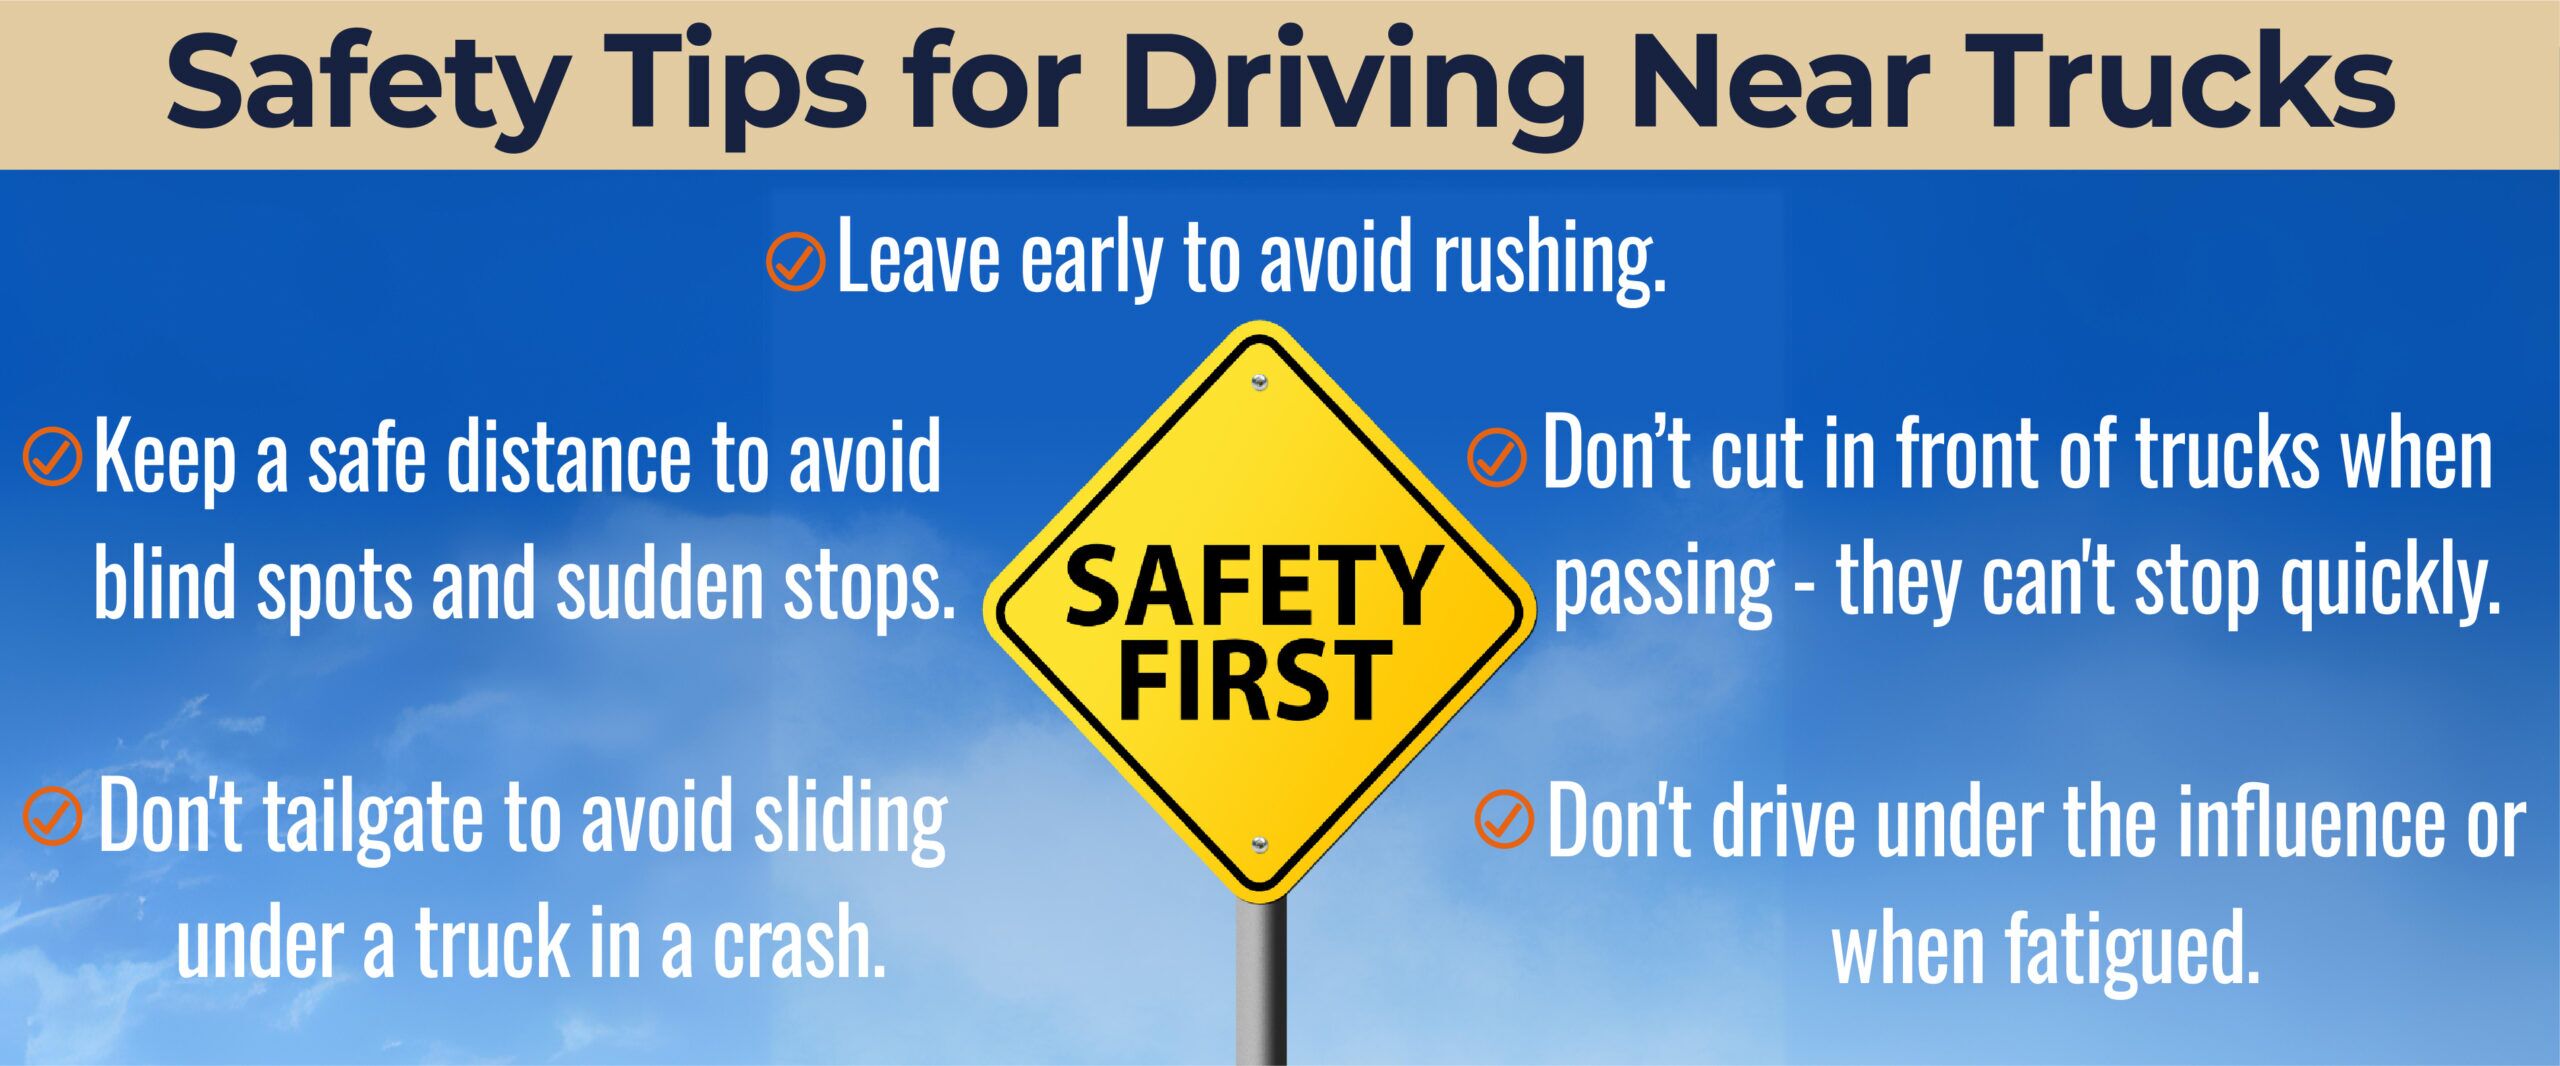 Safety tips for driving near trucks